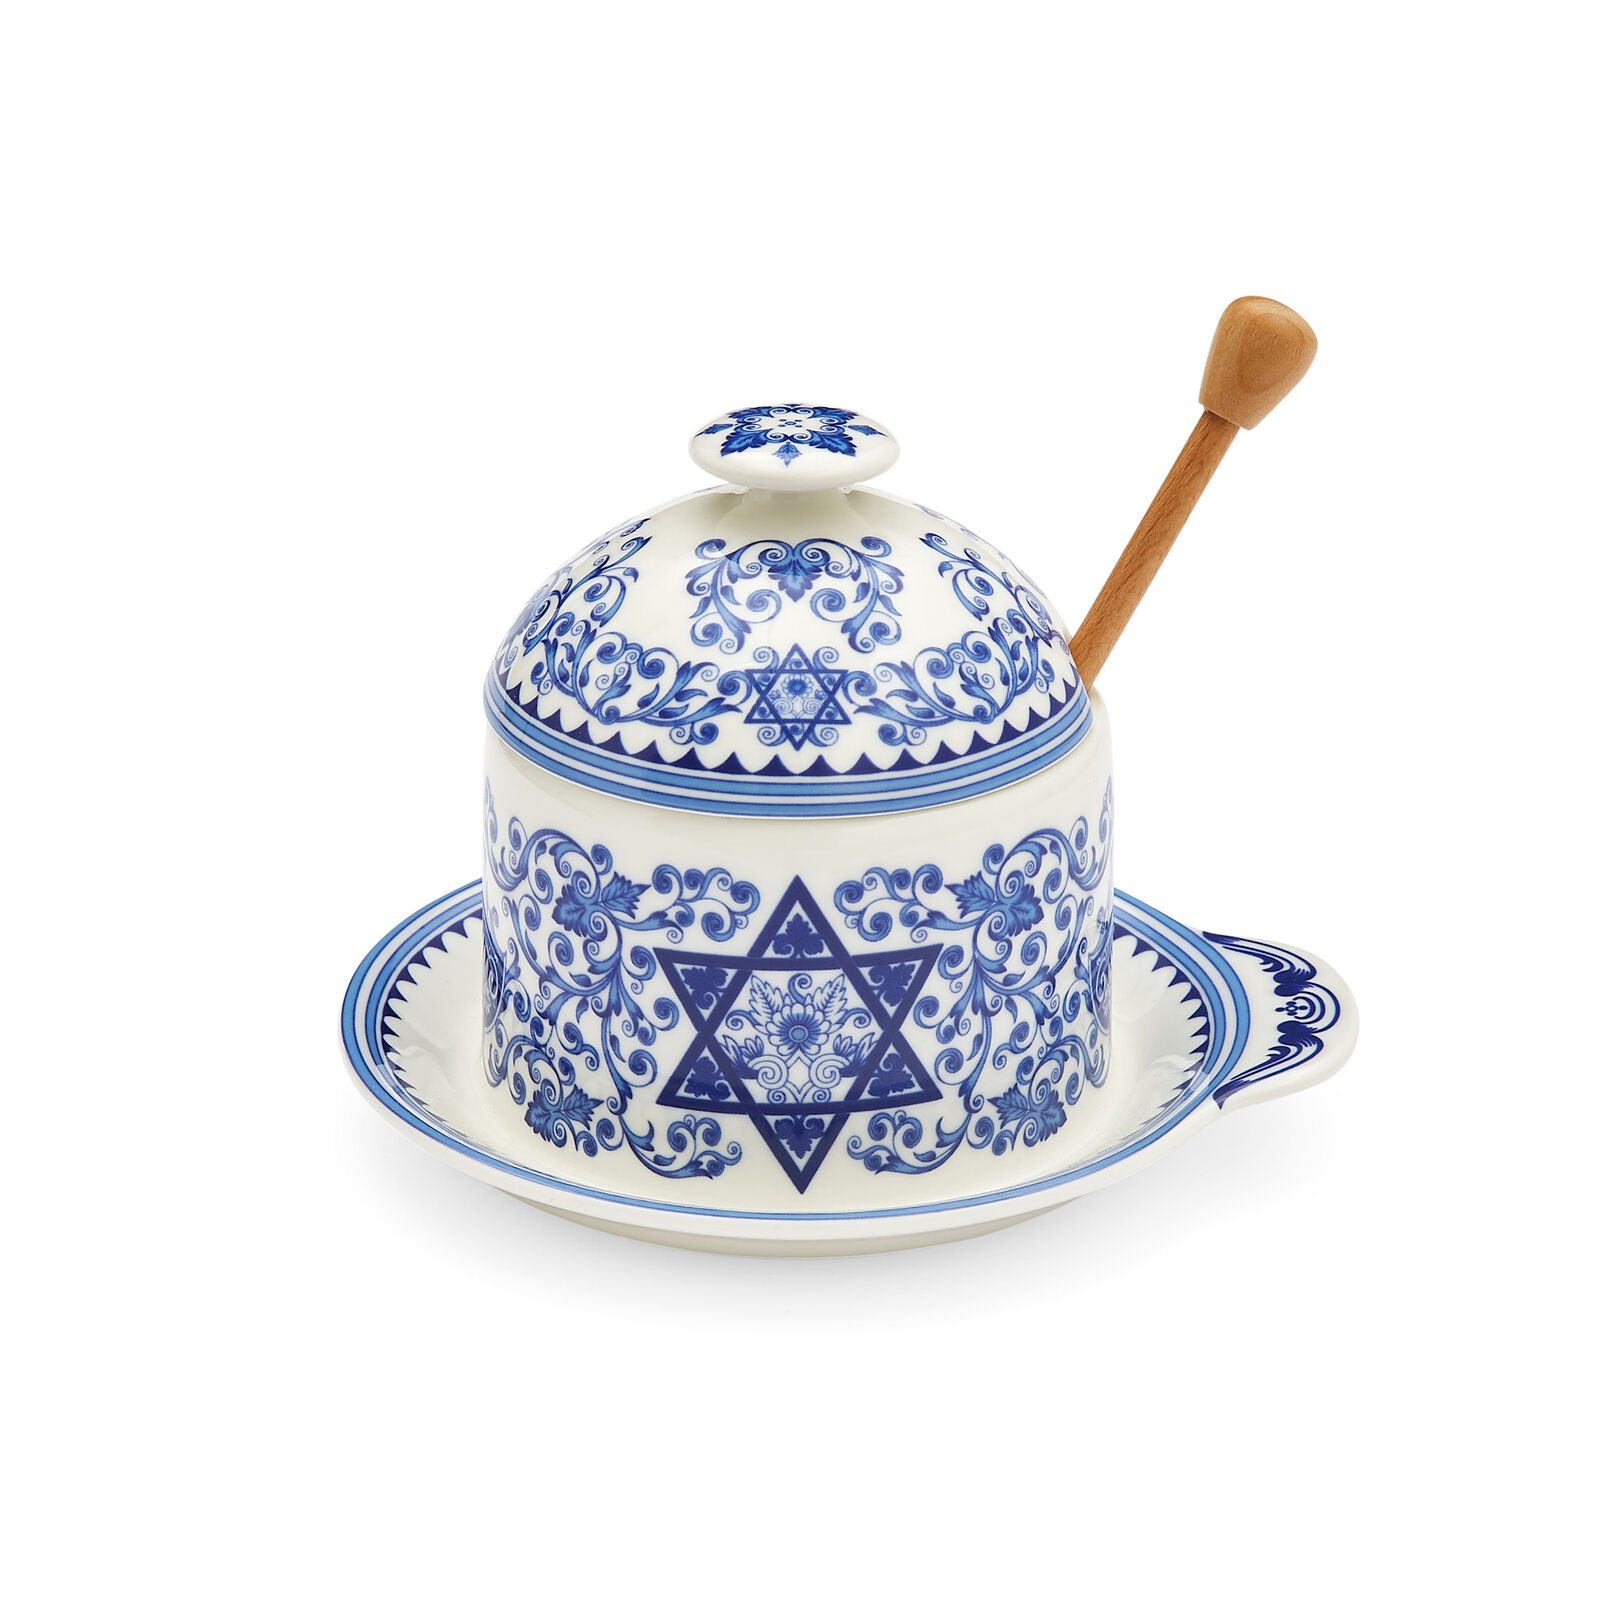 Spode Judaica Honey Pot with Drizzler 5.25 Inch, Made of Fine Porcelain